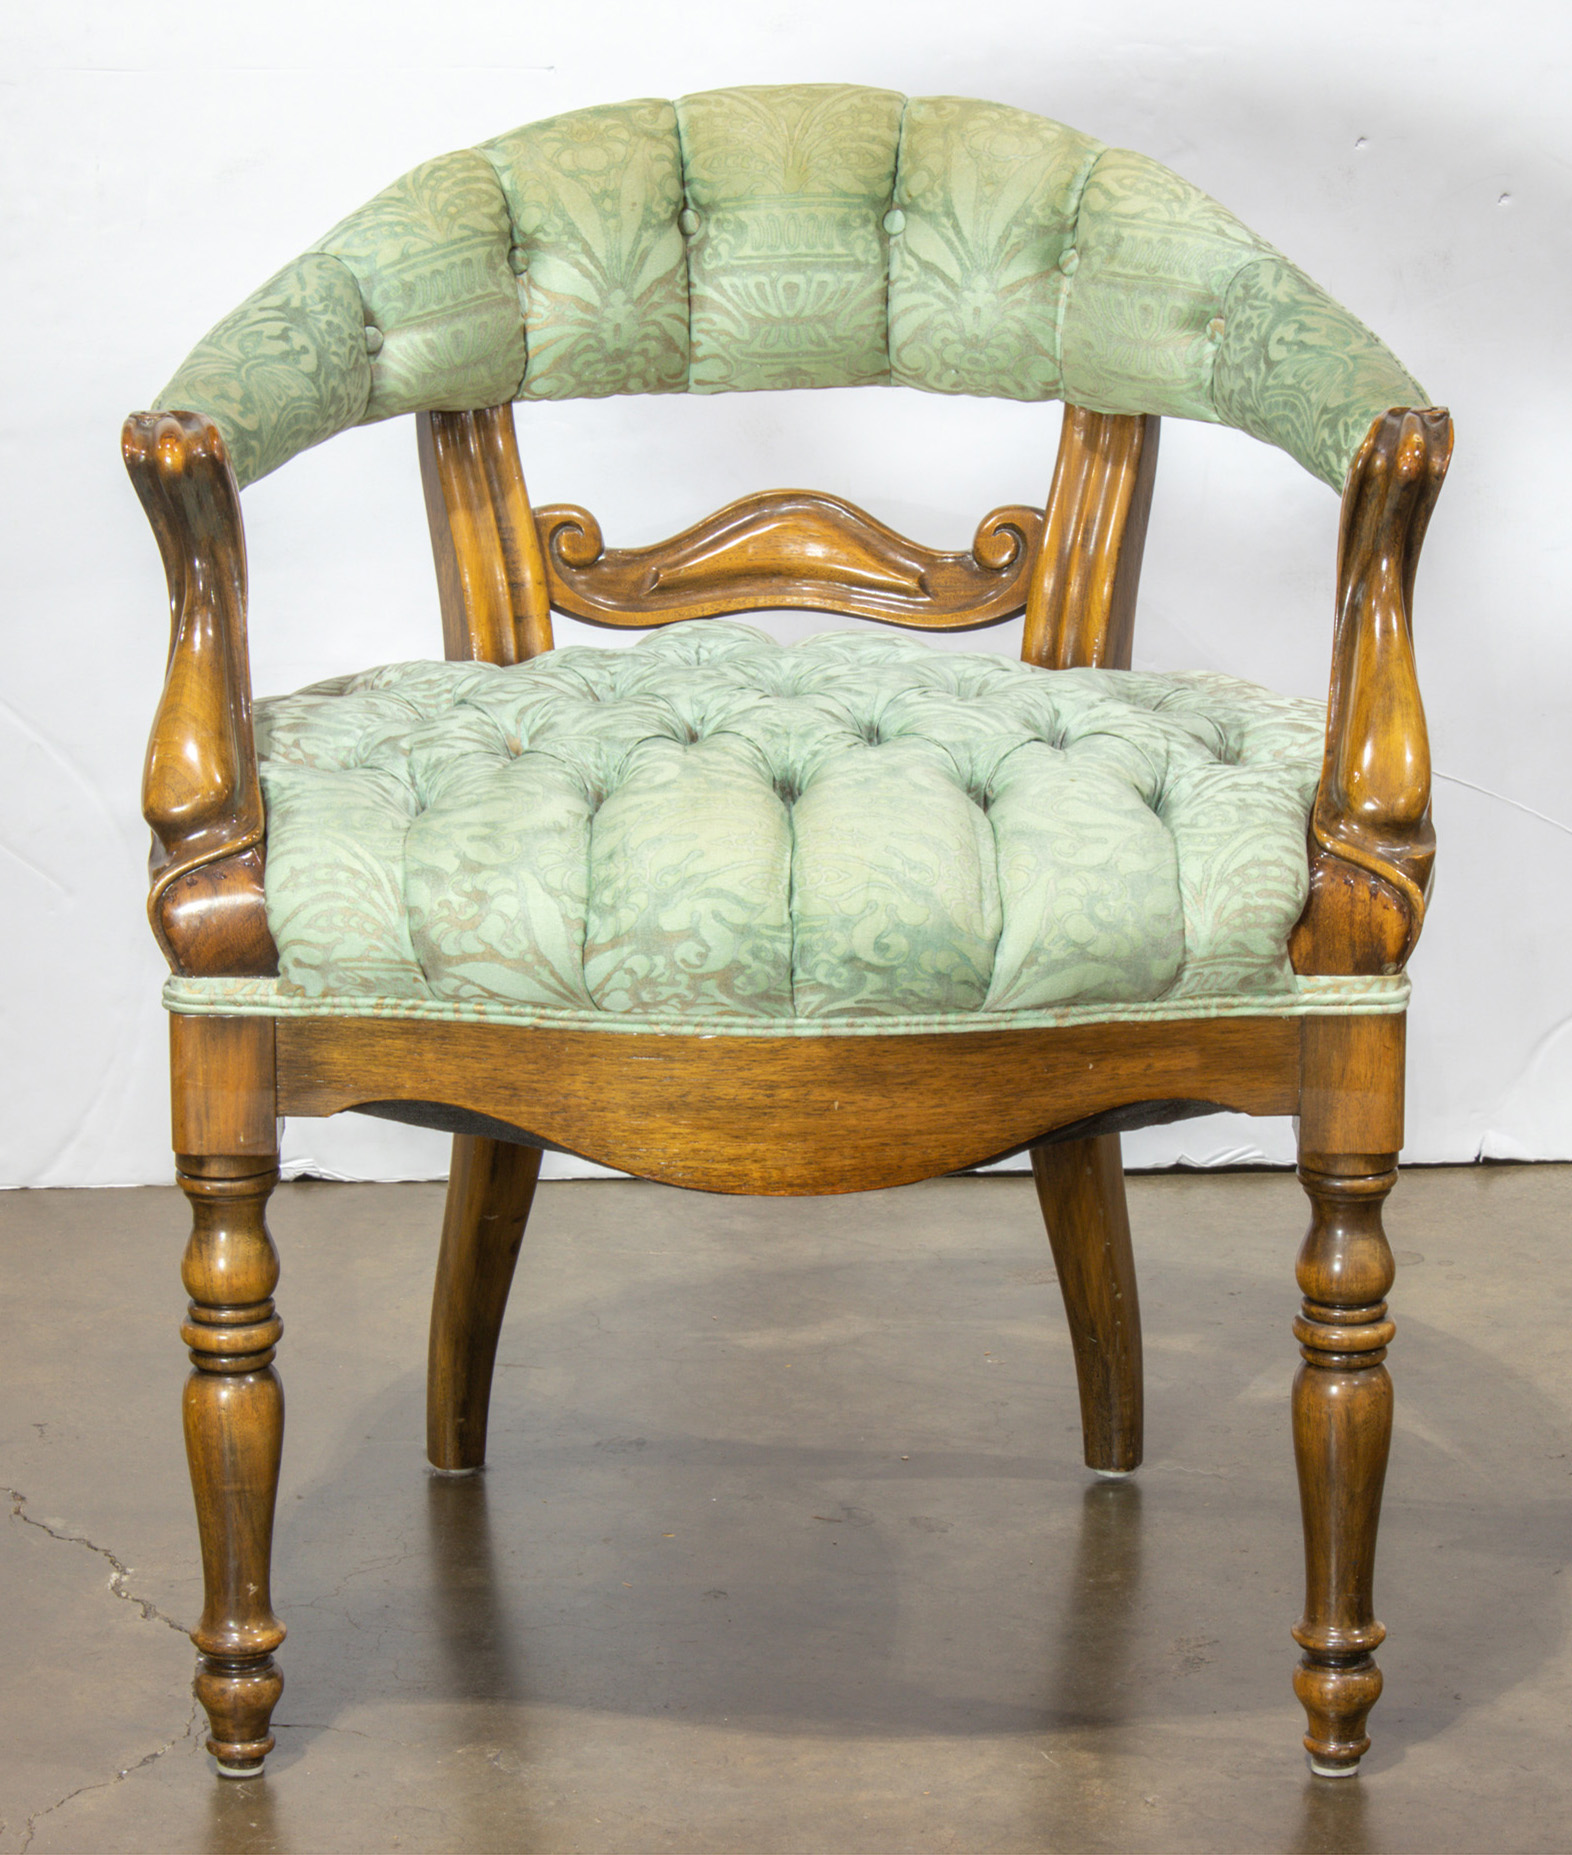 A NEOCLASSICAL STYLE TUFTED ARMCHAIR